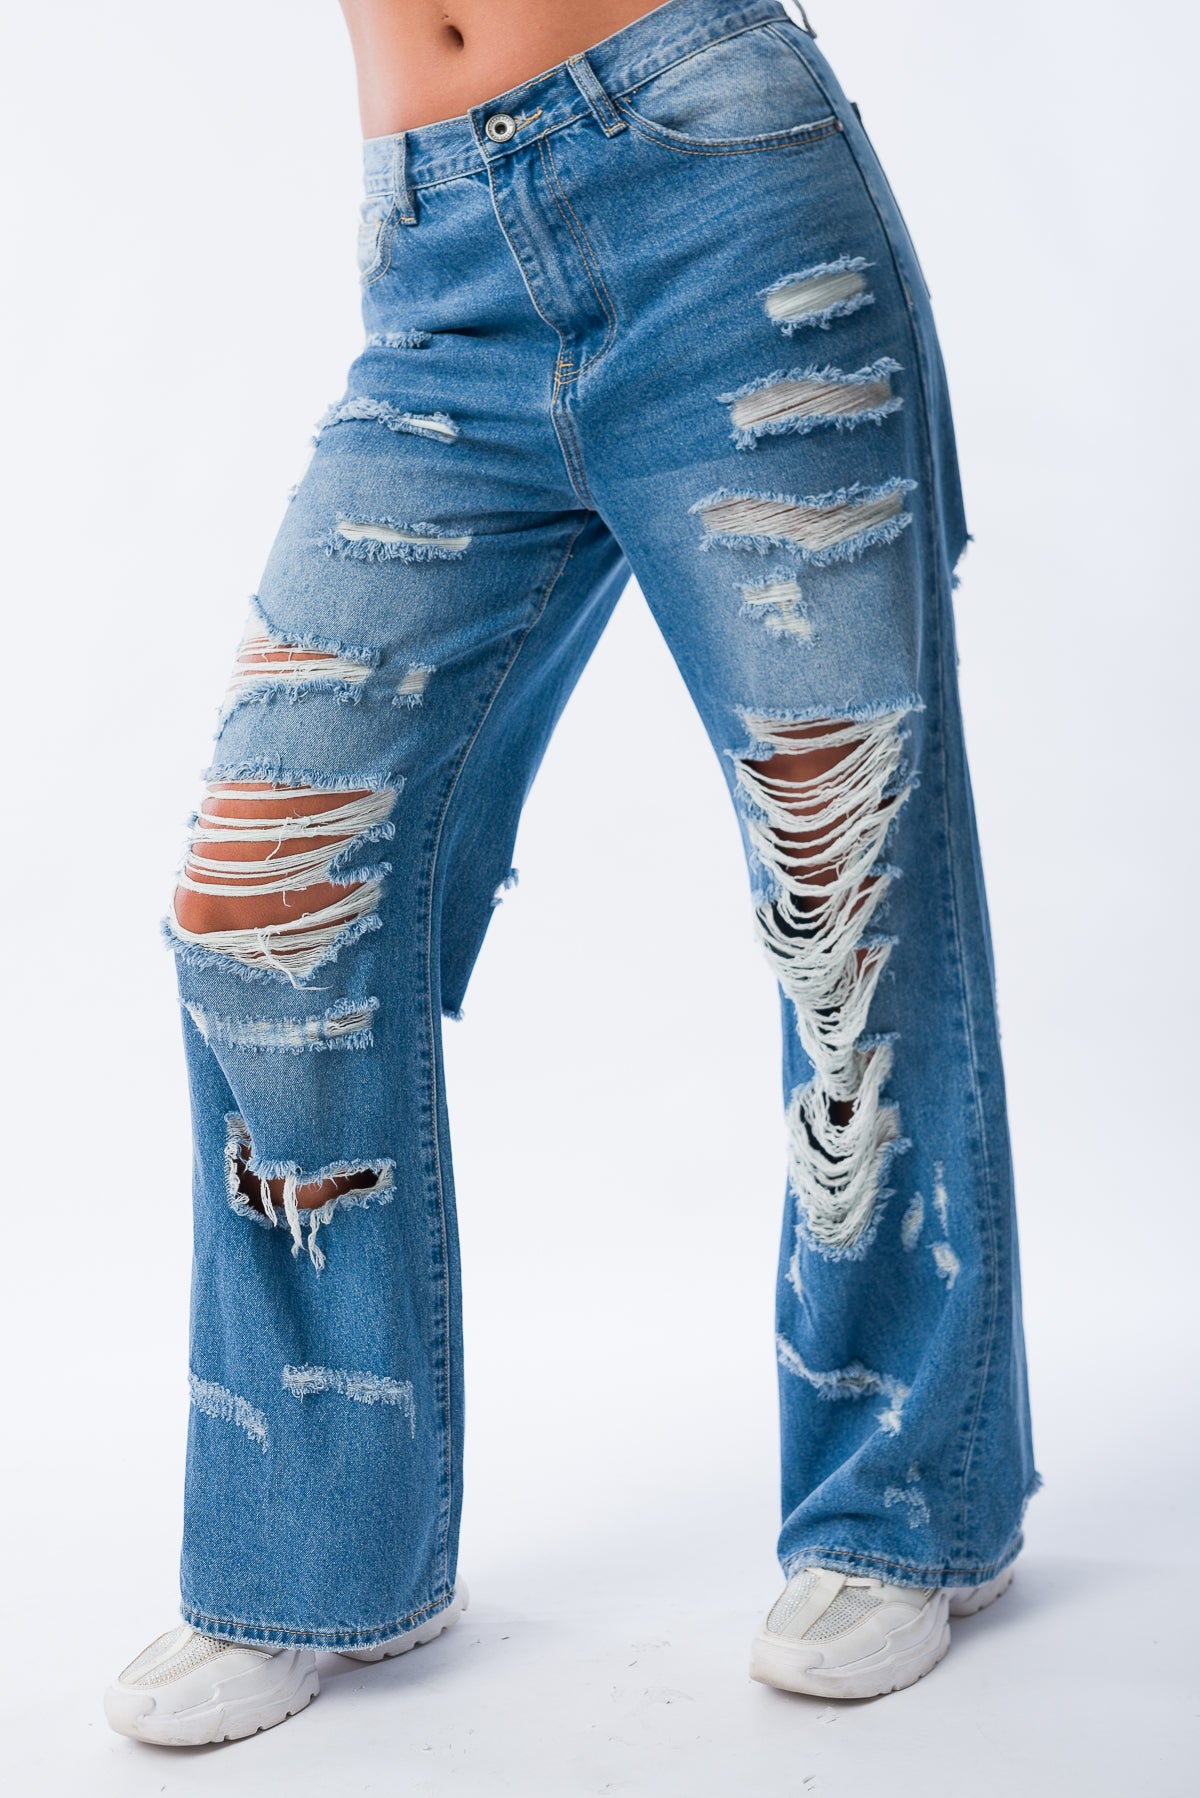 Jeans Ancho Rotura